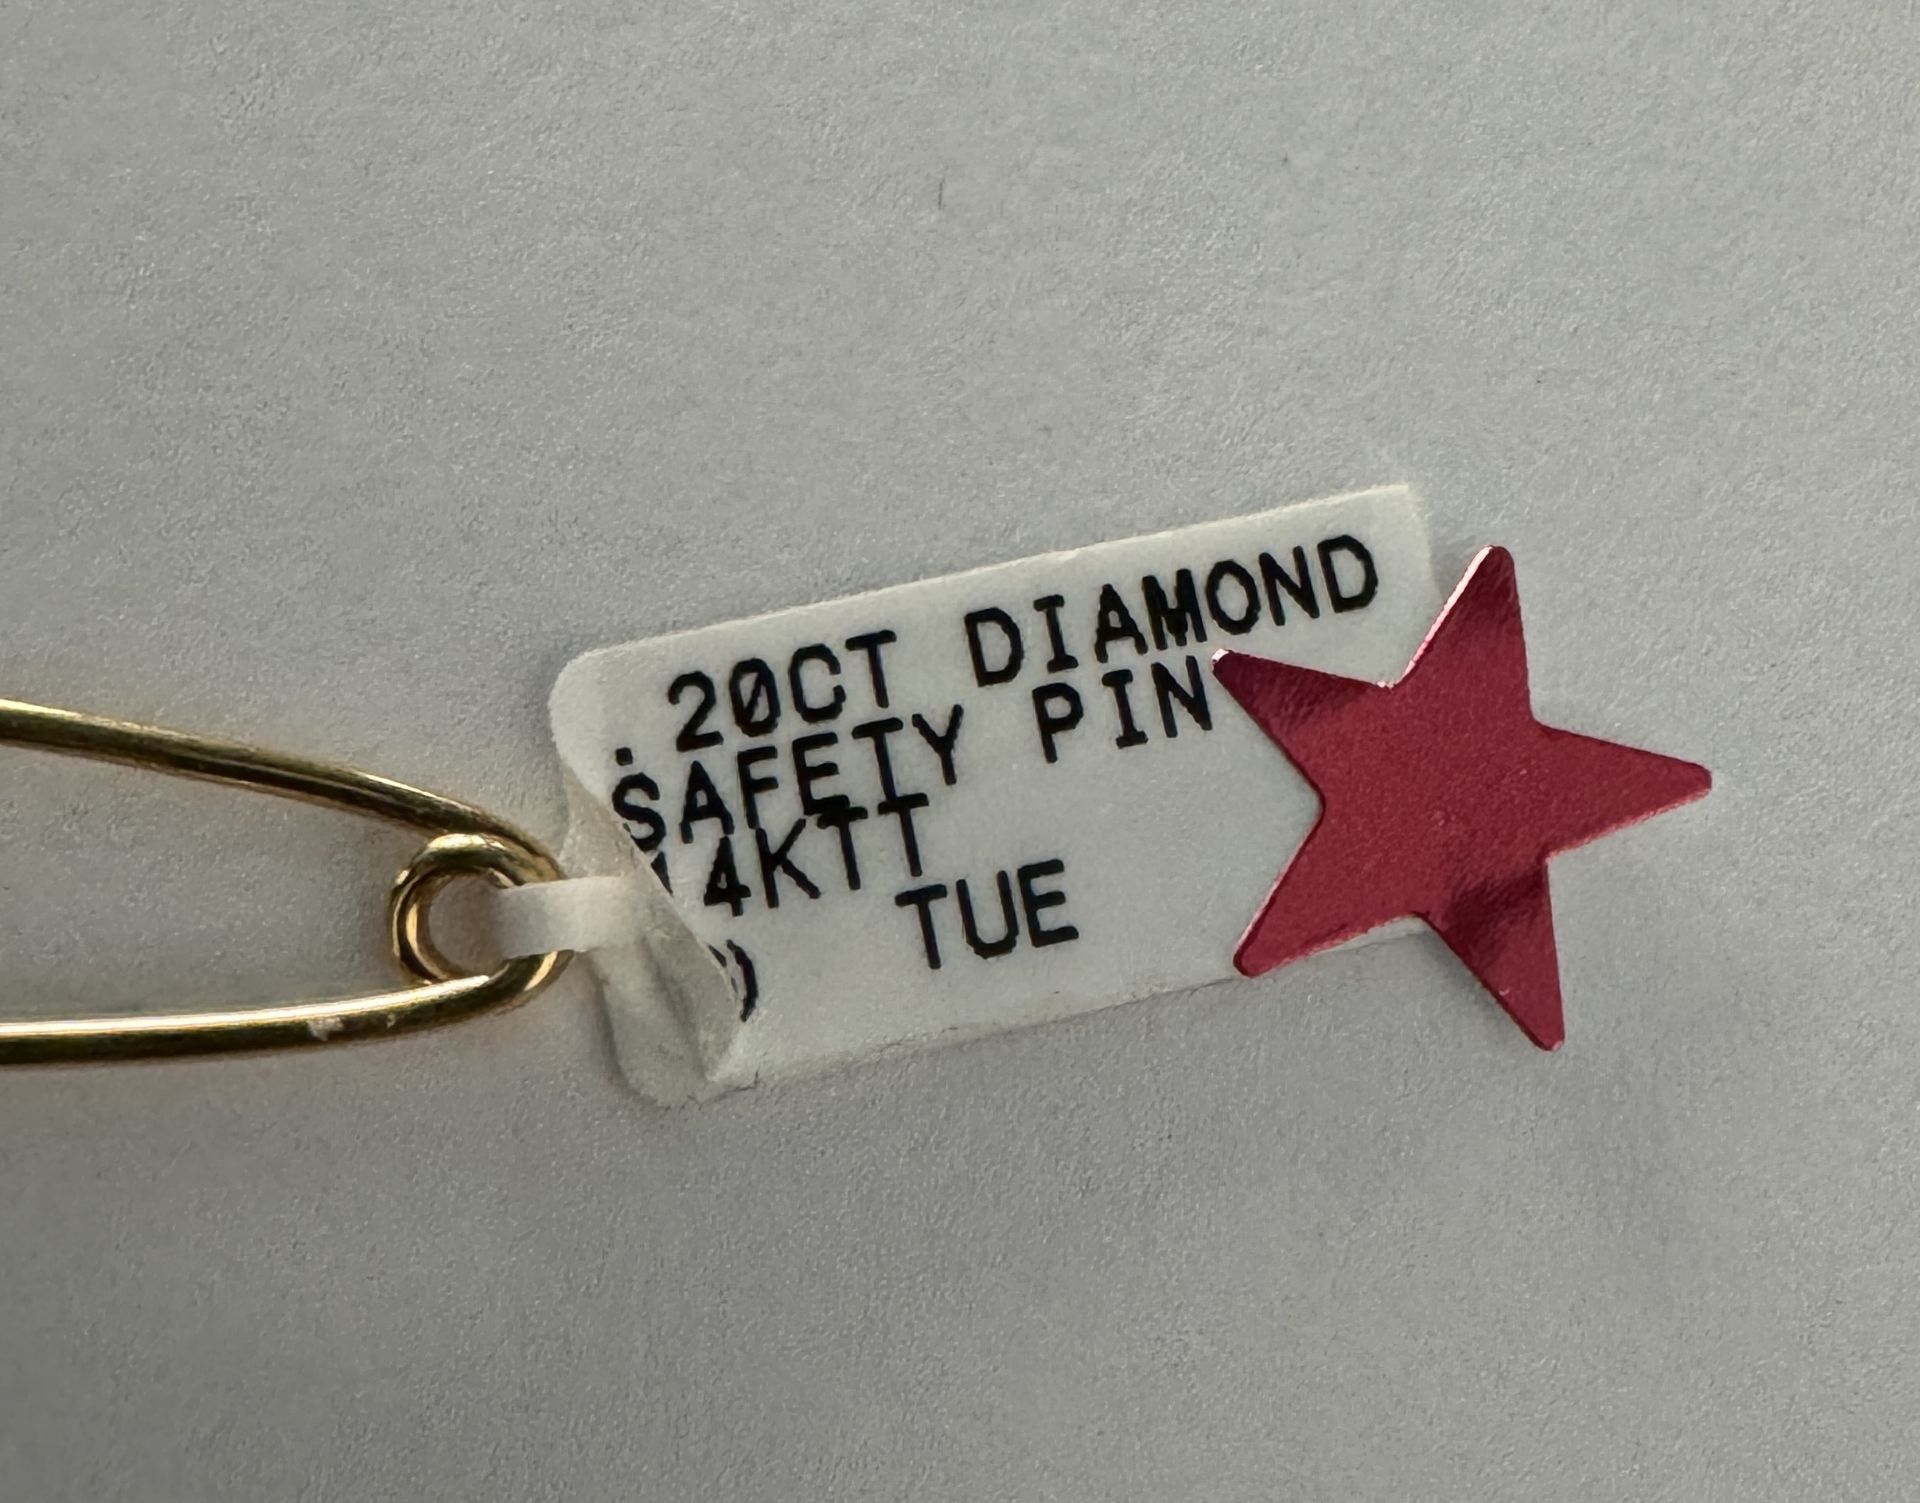 .20 14KT DIAMOND + GOLD SAFETY PIN $900 RETAIL - Image 2 of 3